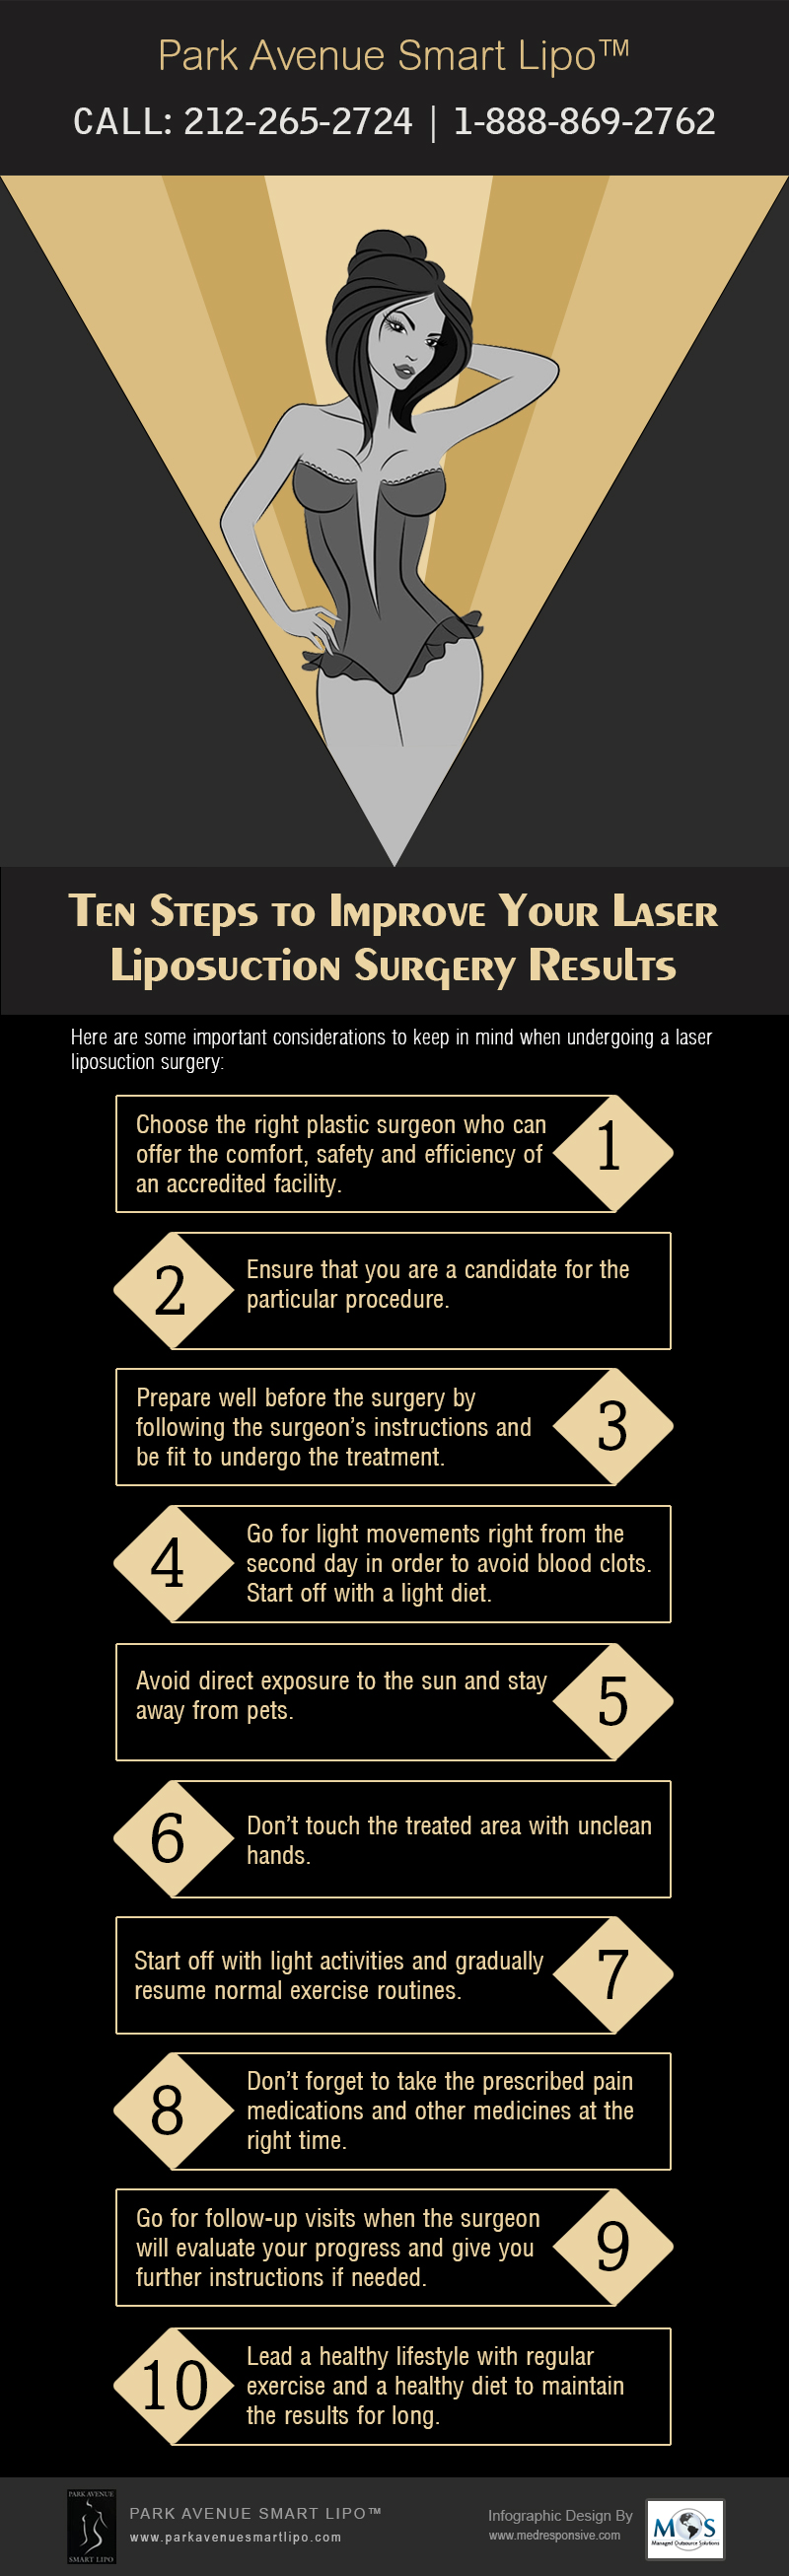 Steps to Improve Your Laser Liposuction Surgery Results